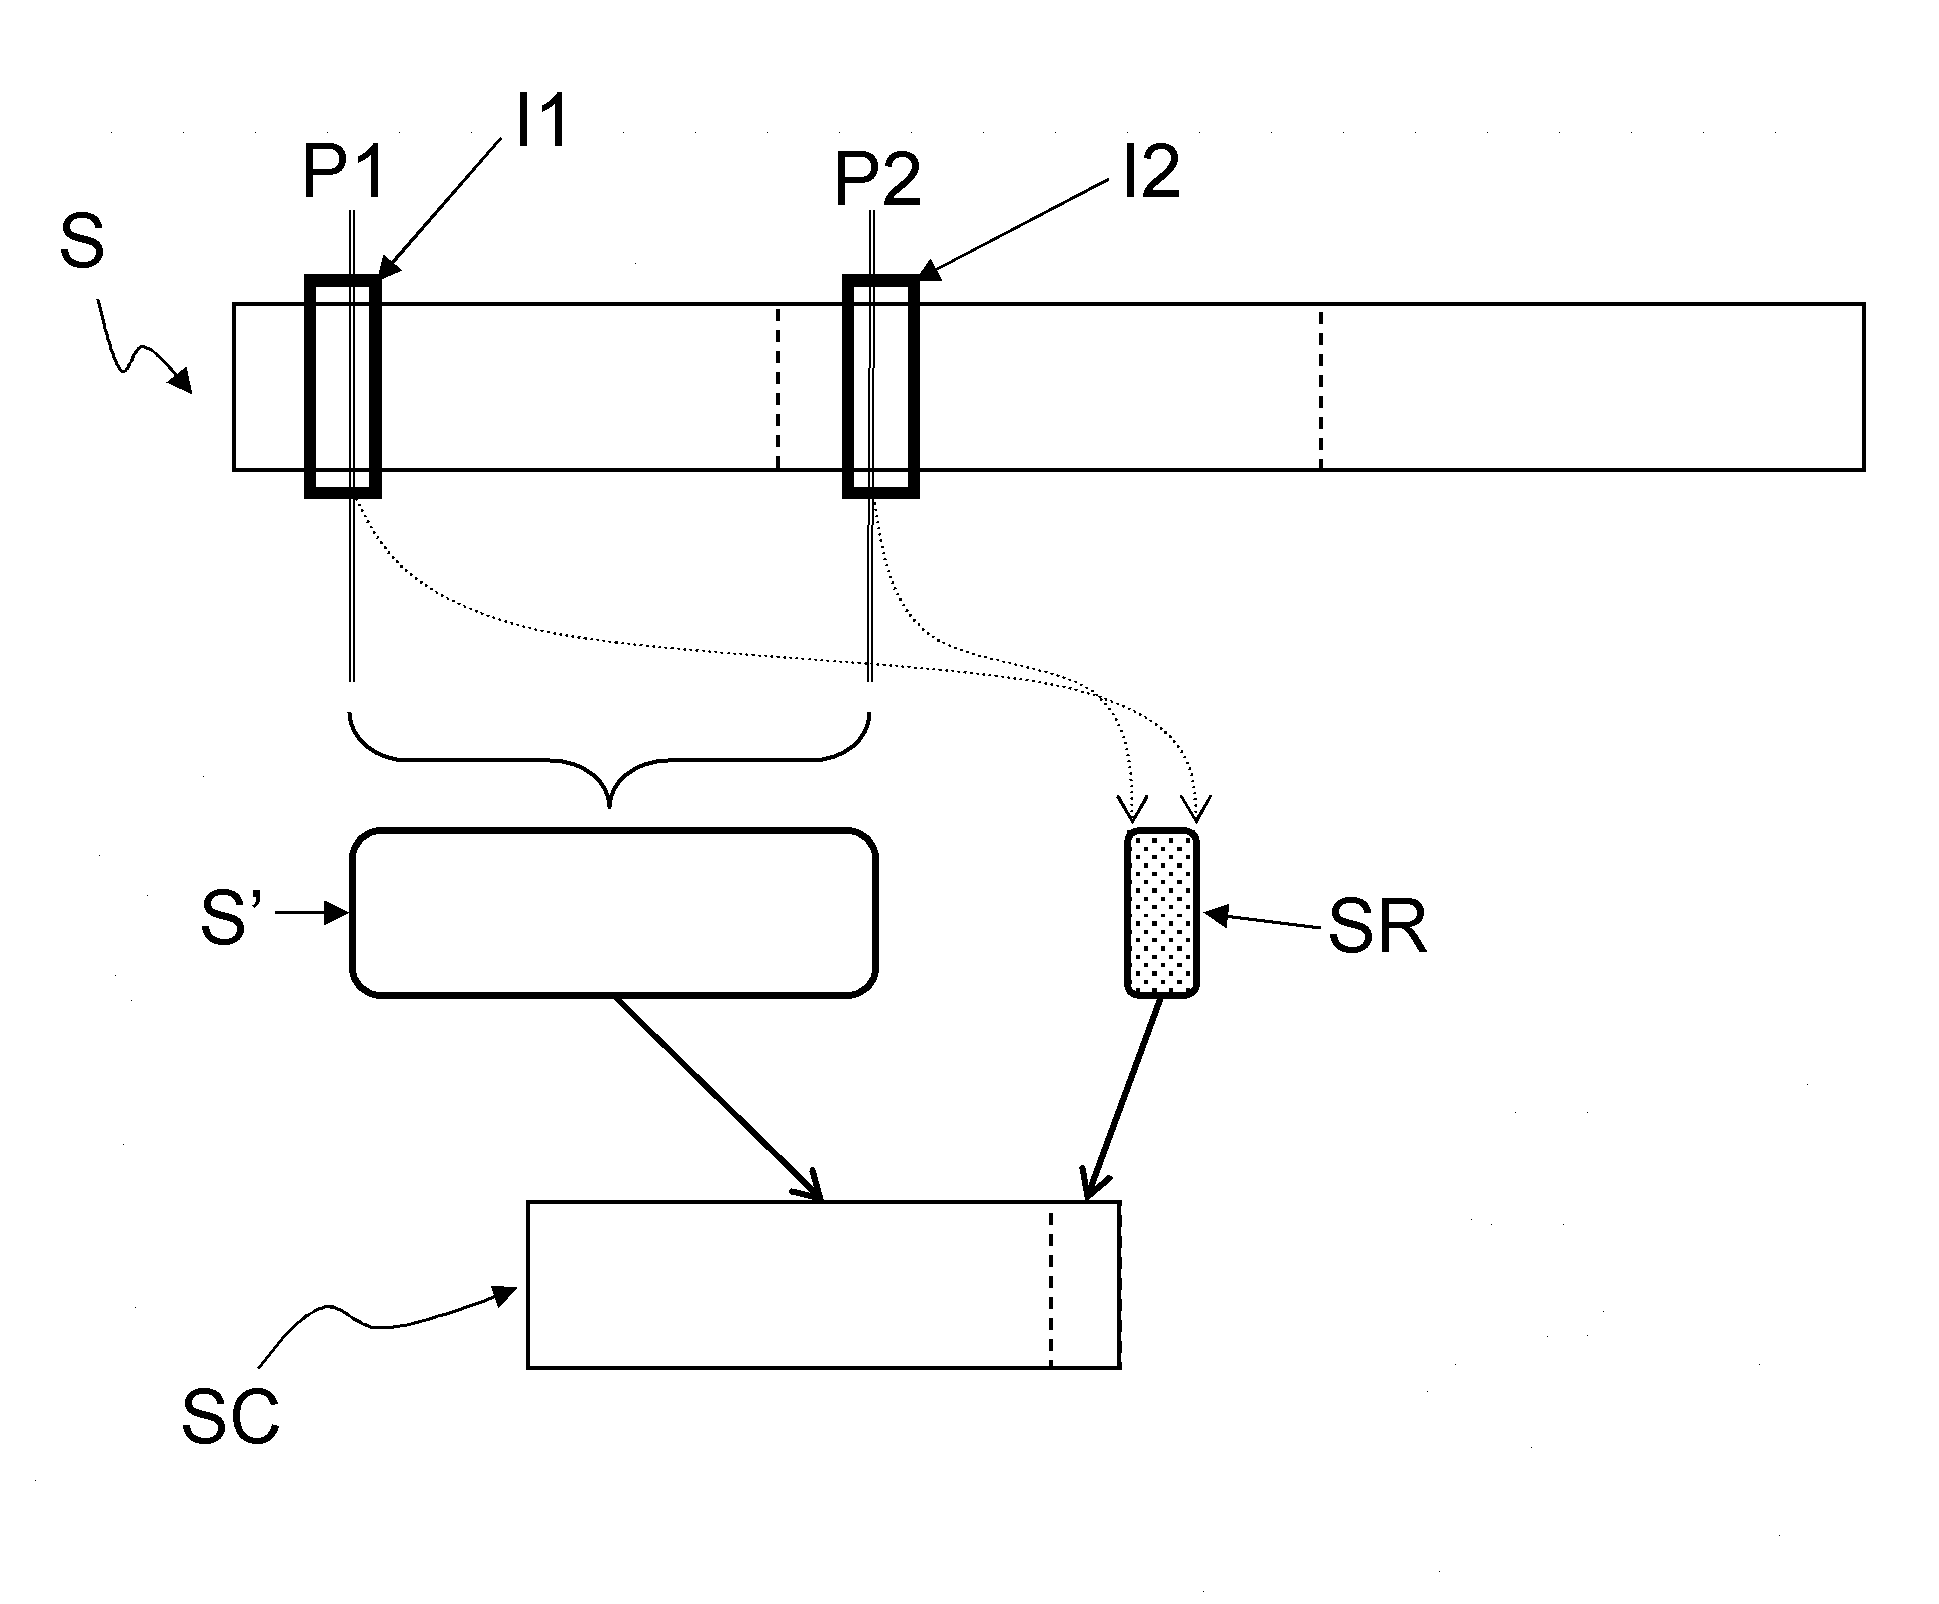 Method for generating a cyclic video sequence